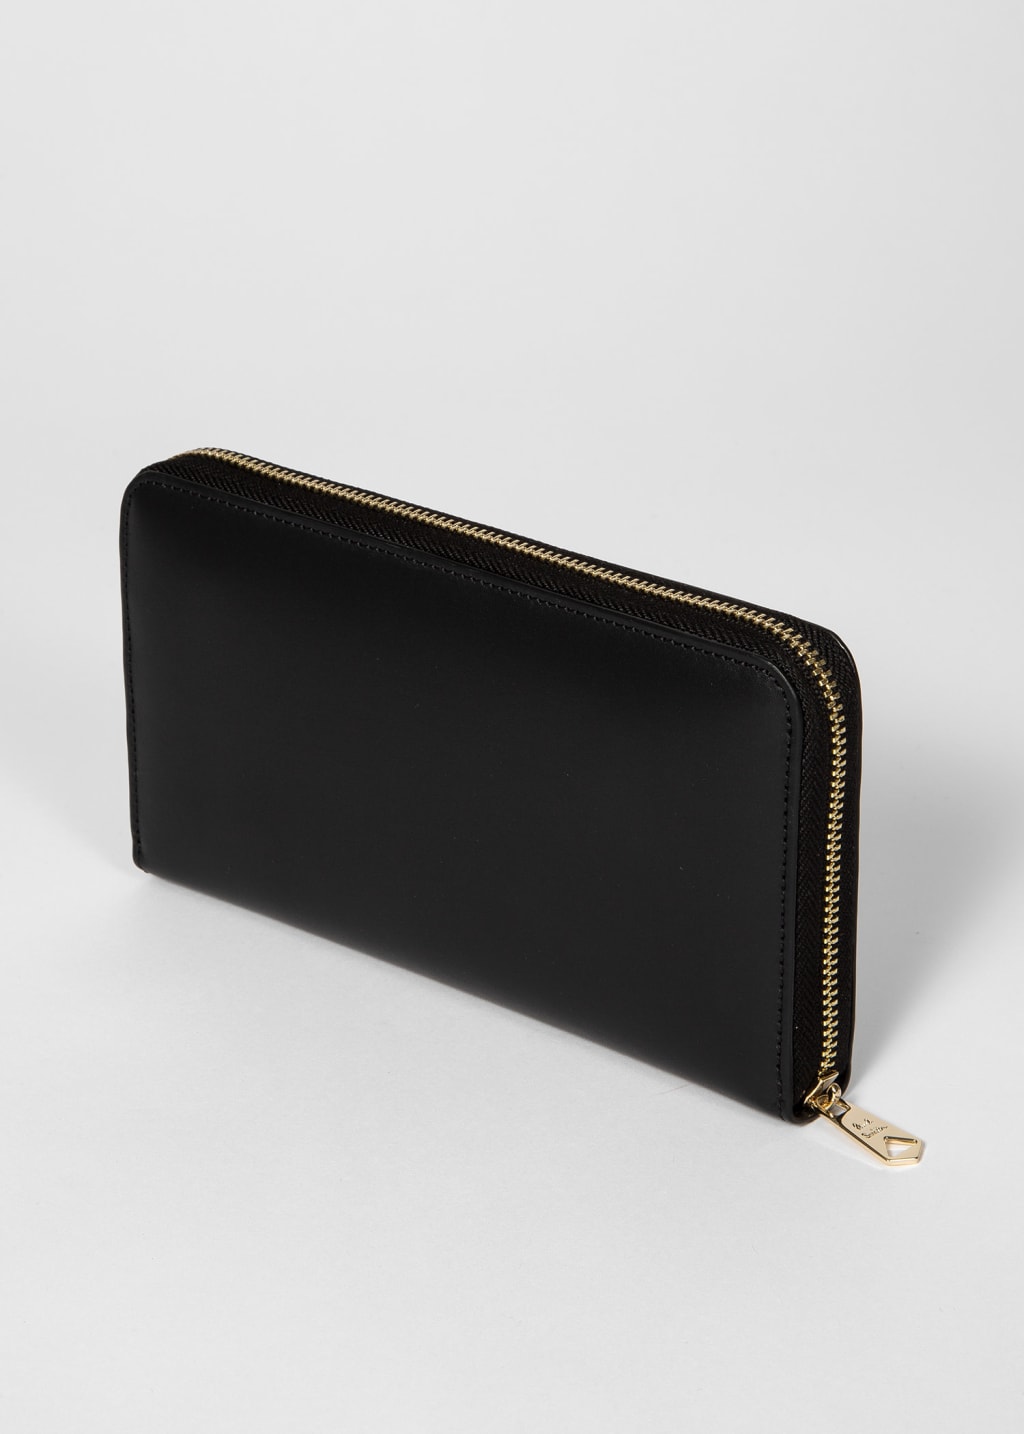 Product View - Large Black Leather 'Signature Stripe' Interior Zip-Around Wallet by Paul Smith